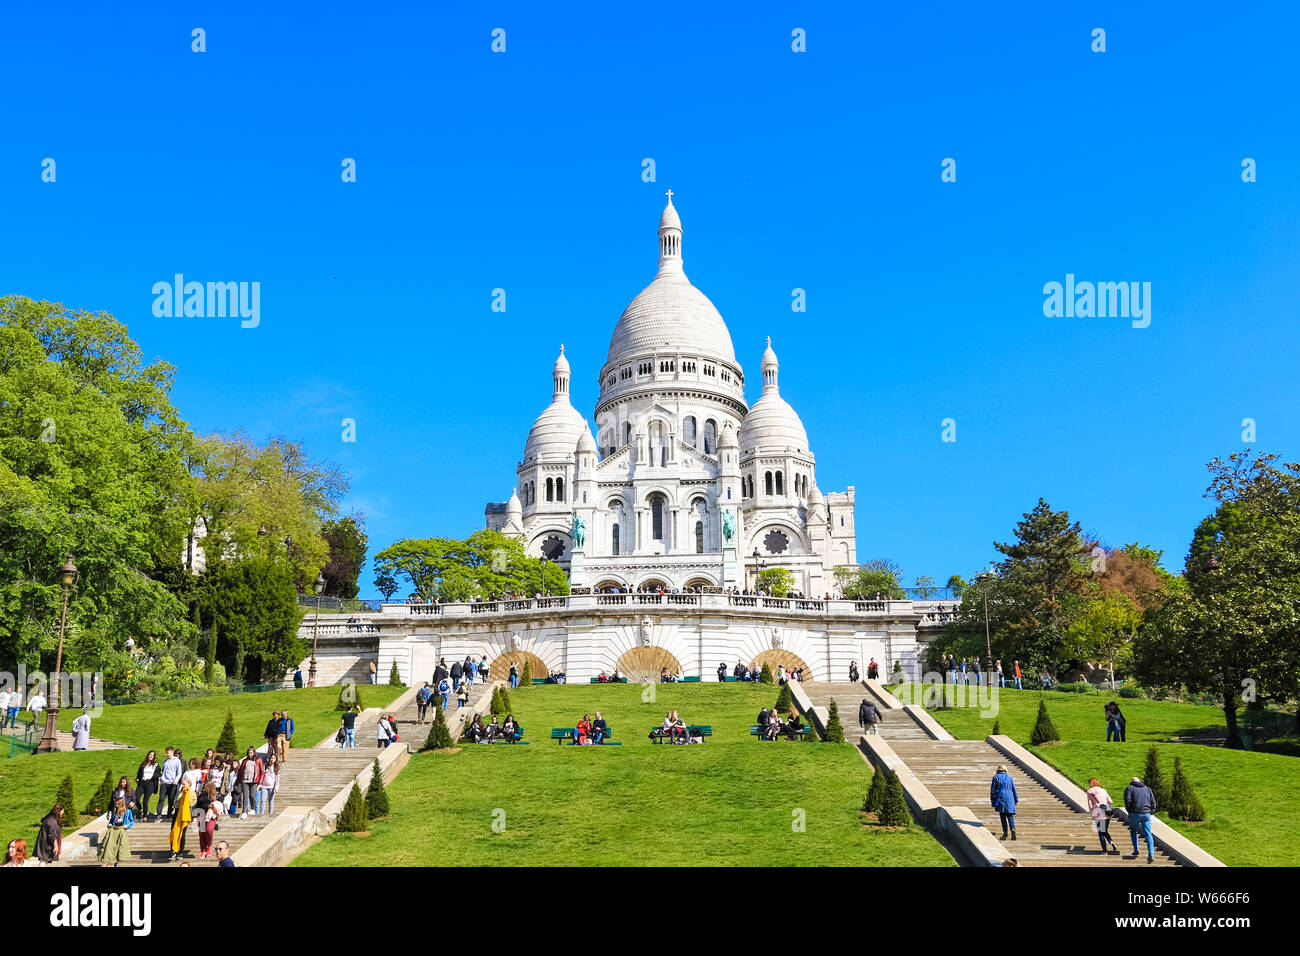 Lovely view of the famous Basilica of Sacré-Cœur with its white facade seen from the base of the butte Montmartre in Paris. It is a popular landmark... Stock Photo